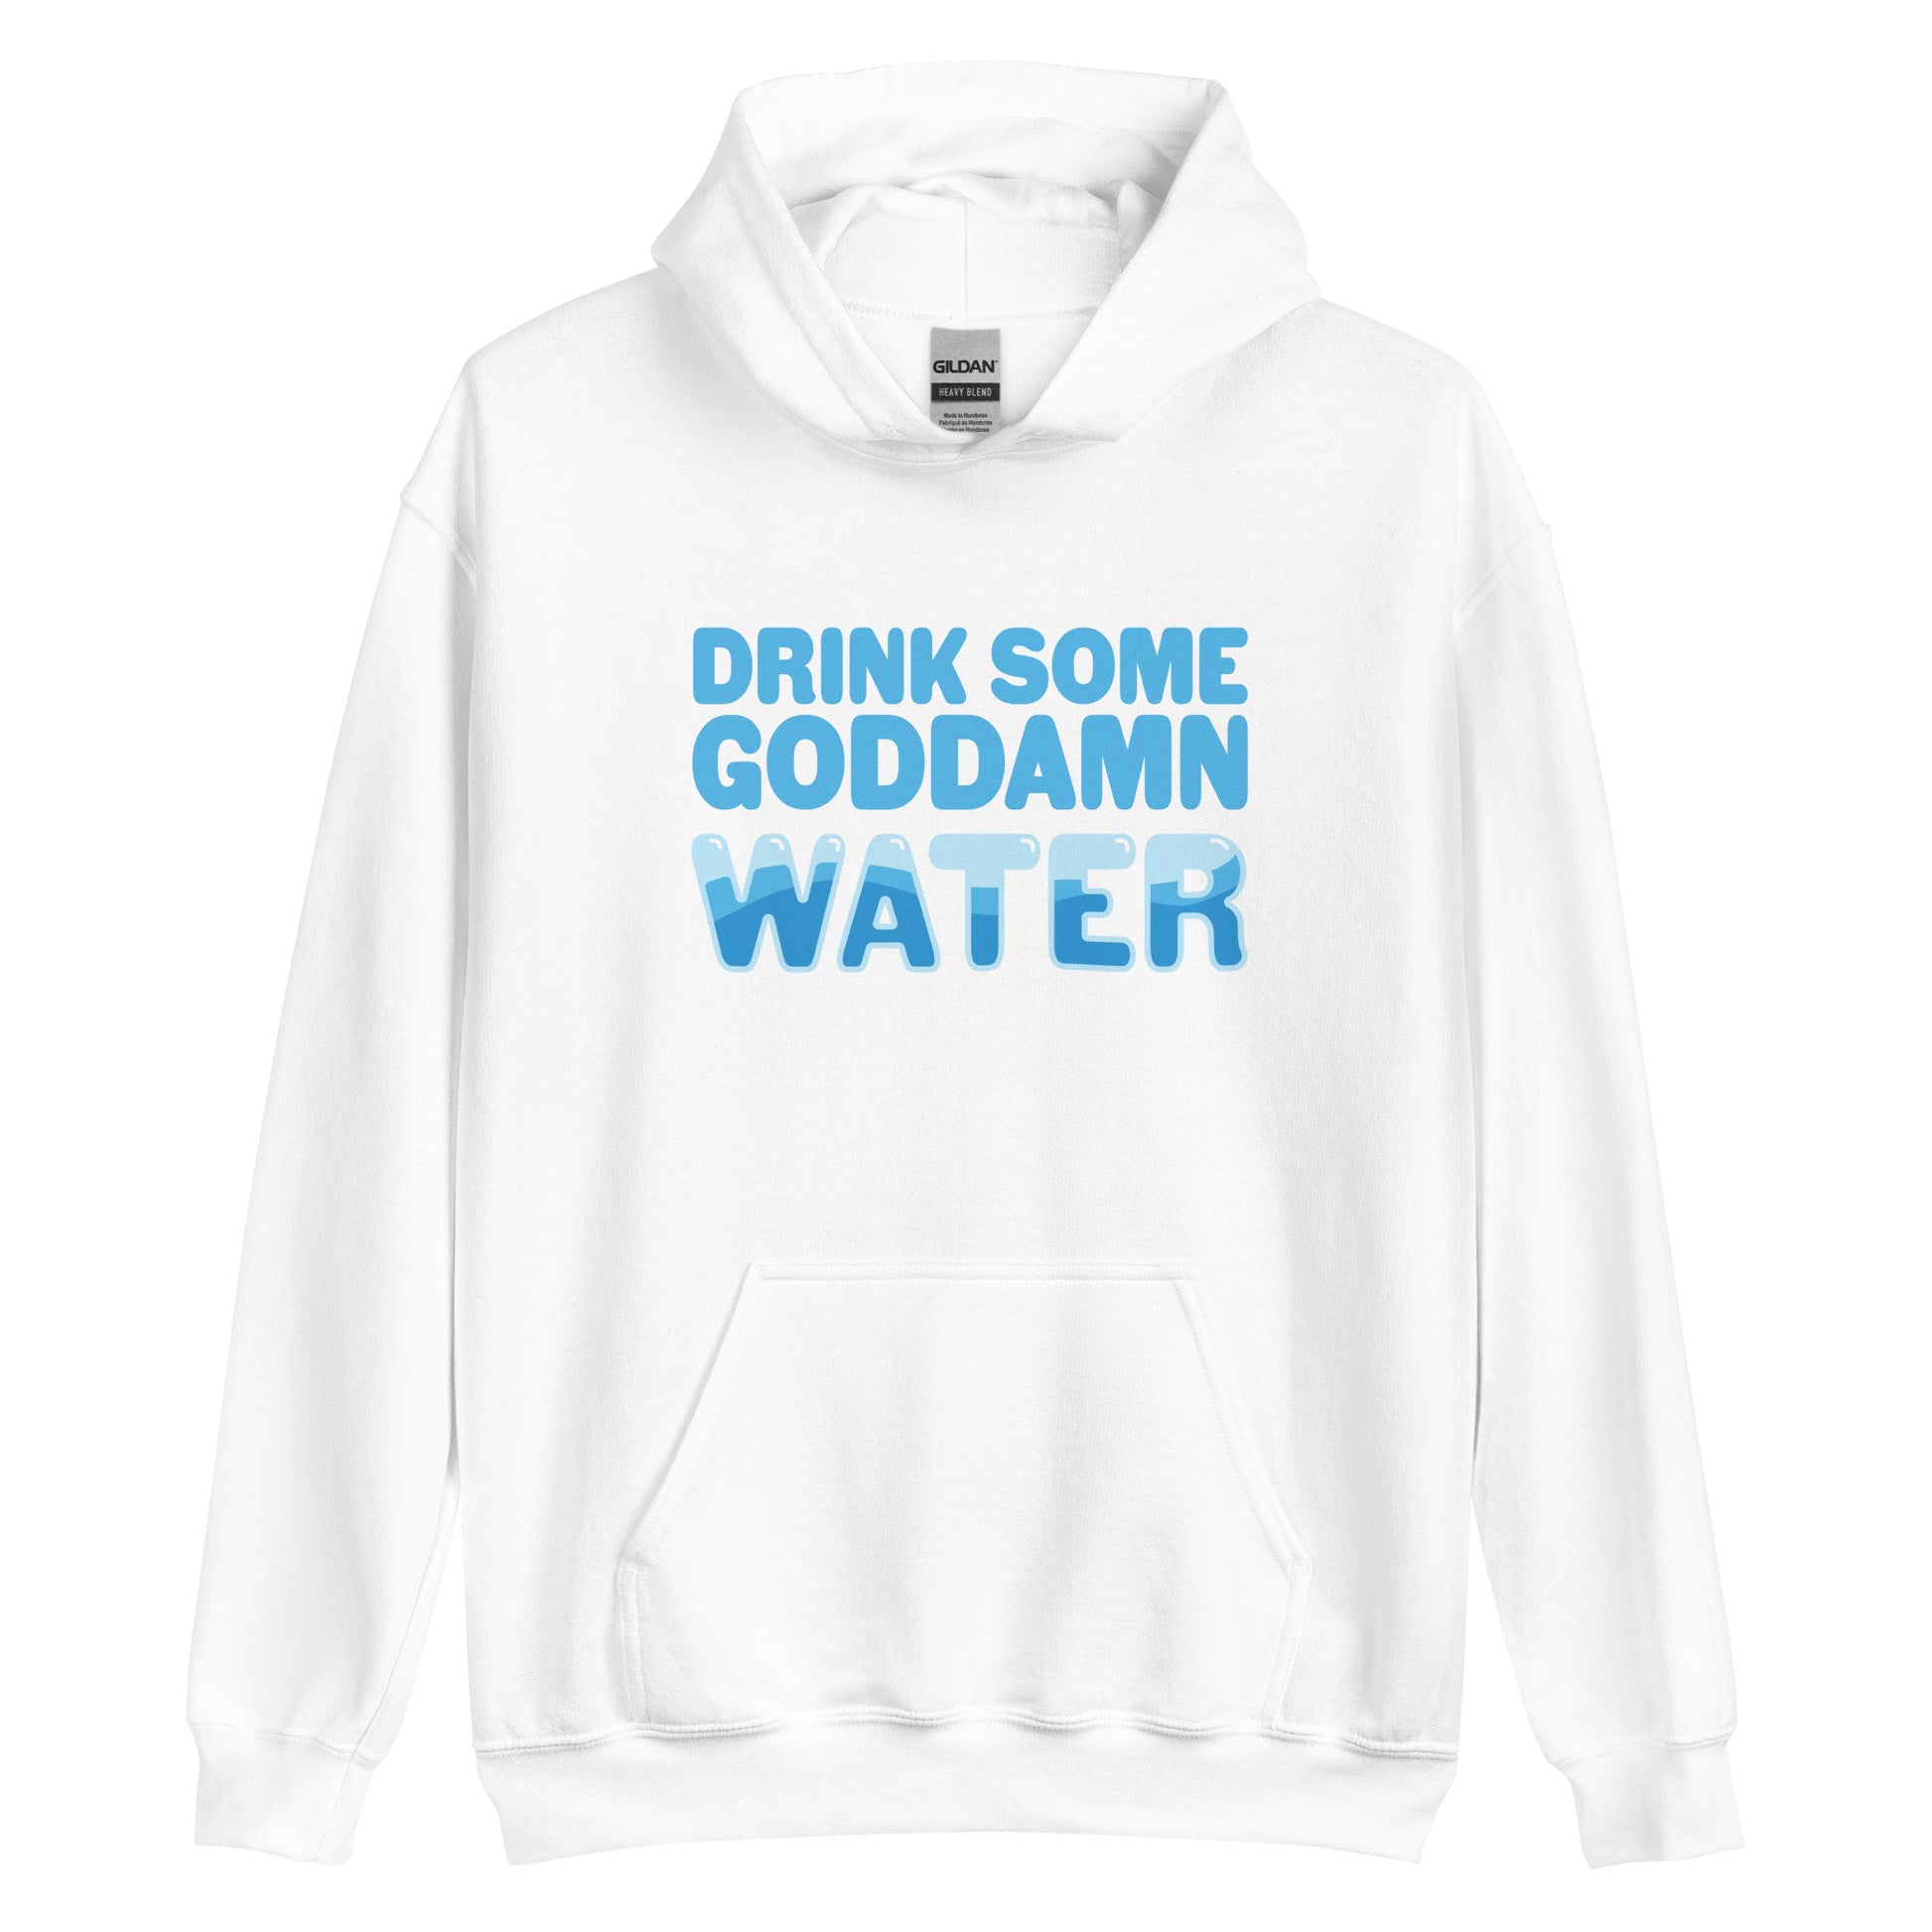 A white hooded sweatshirt with bold blue text reading "Drink some goddamn water"